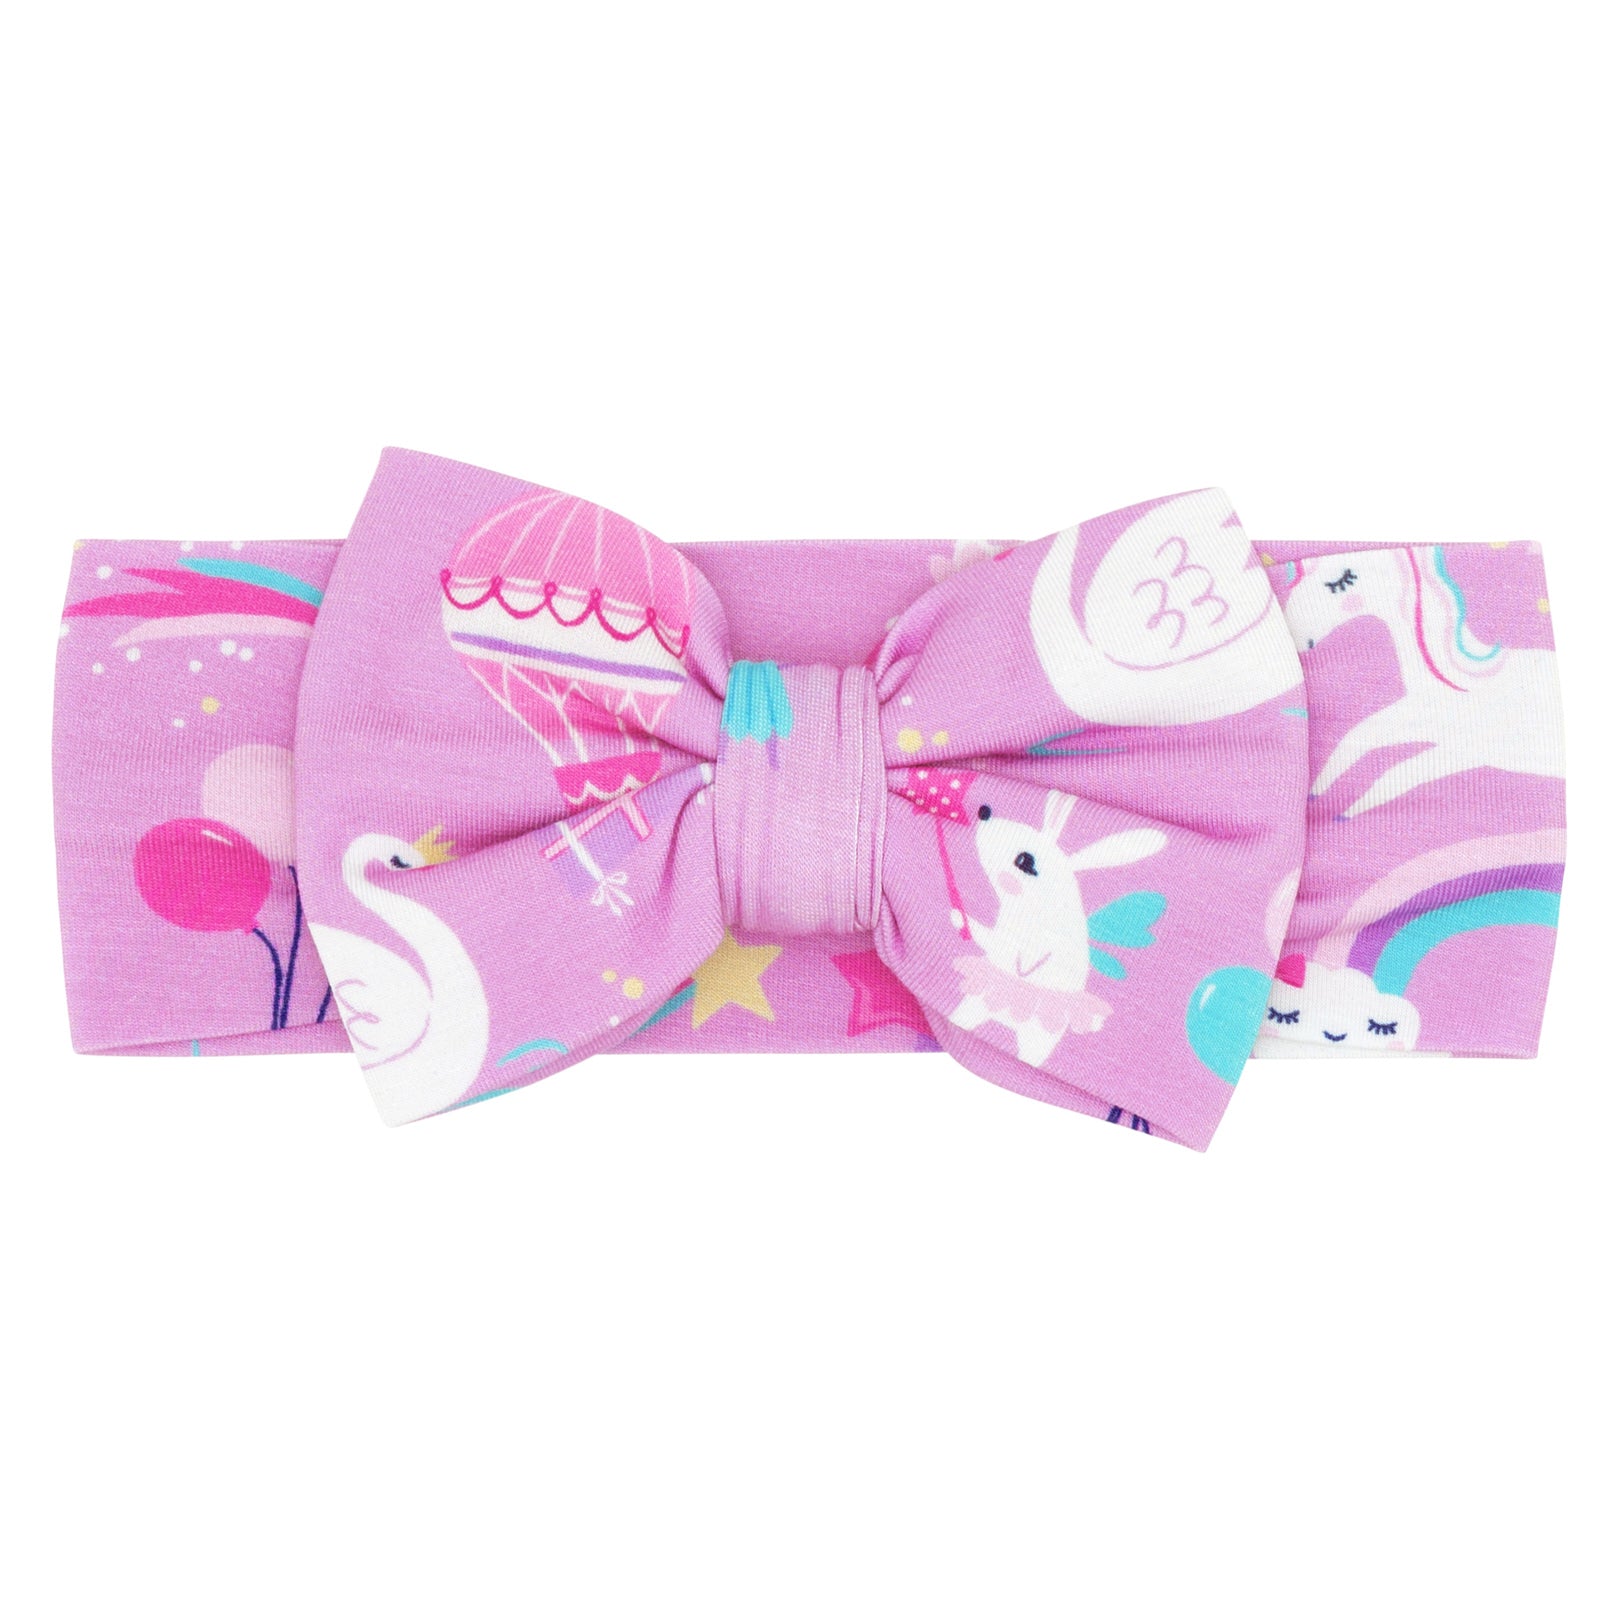 Flat lay image of a Magical Birthday luxe bow headband